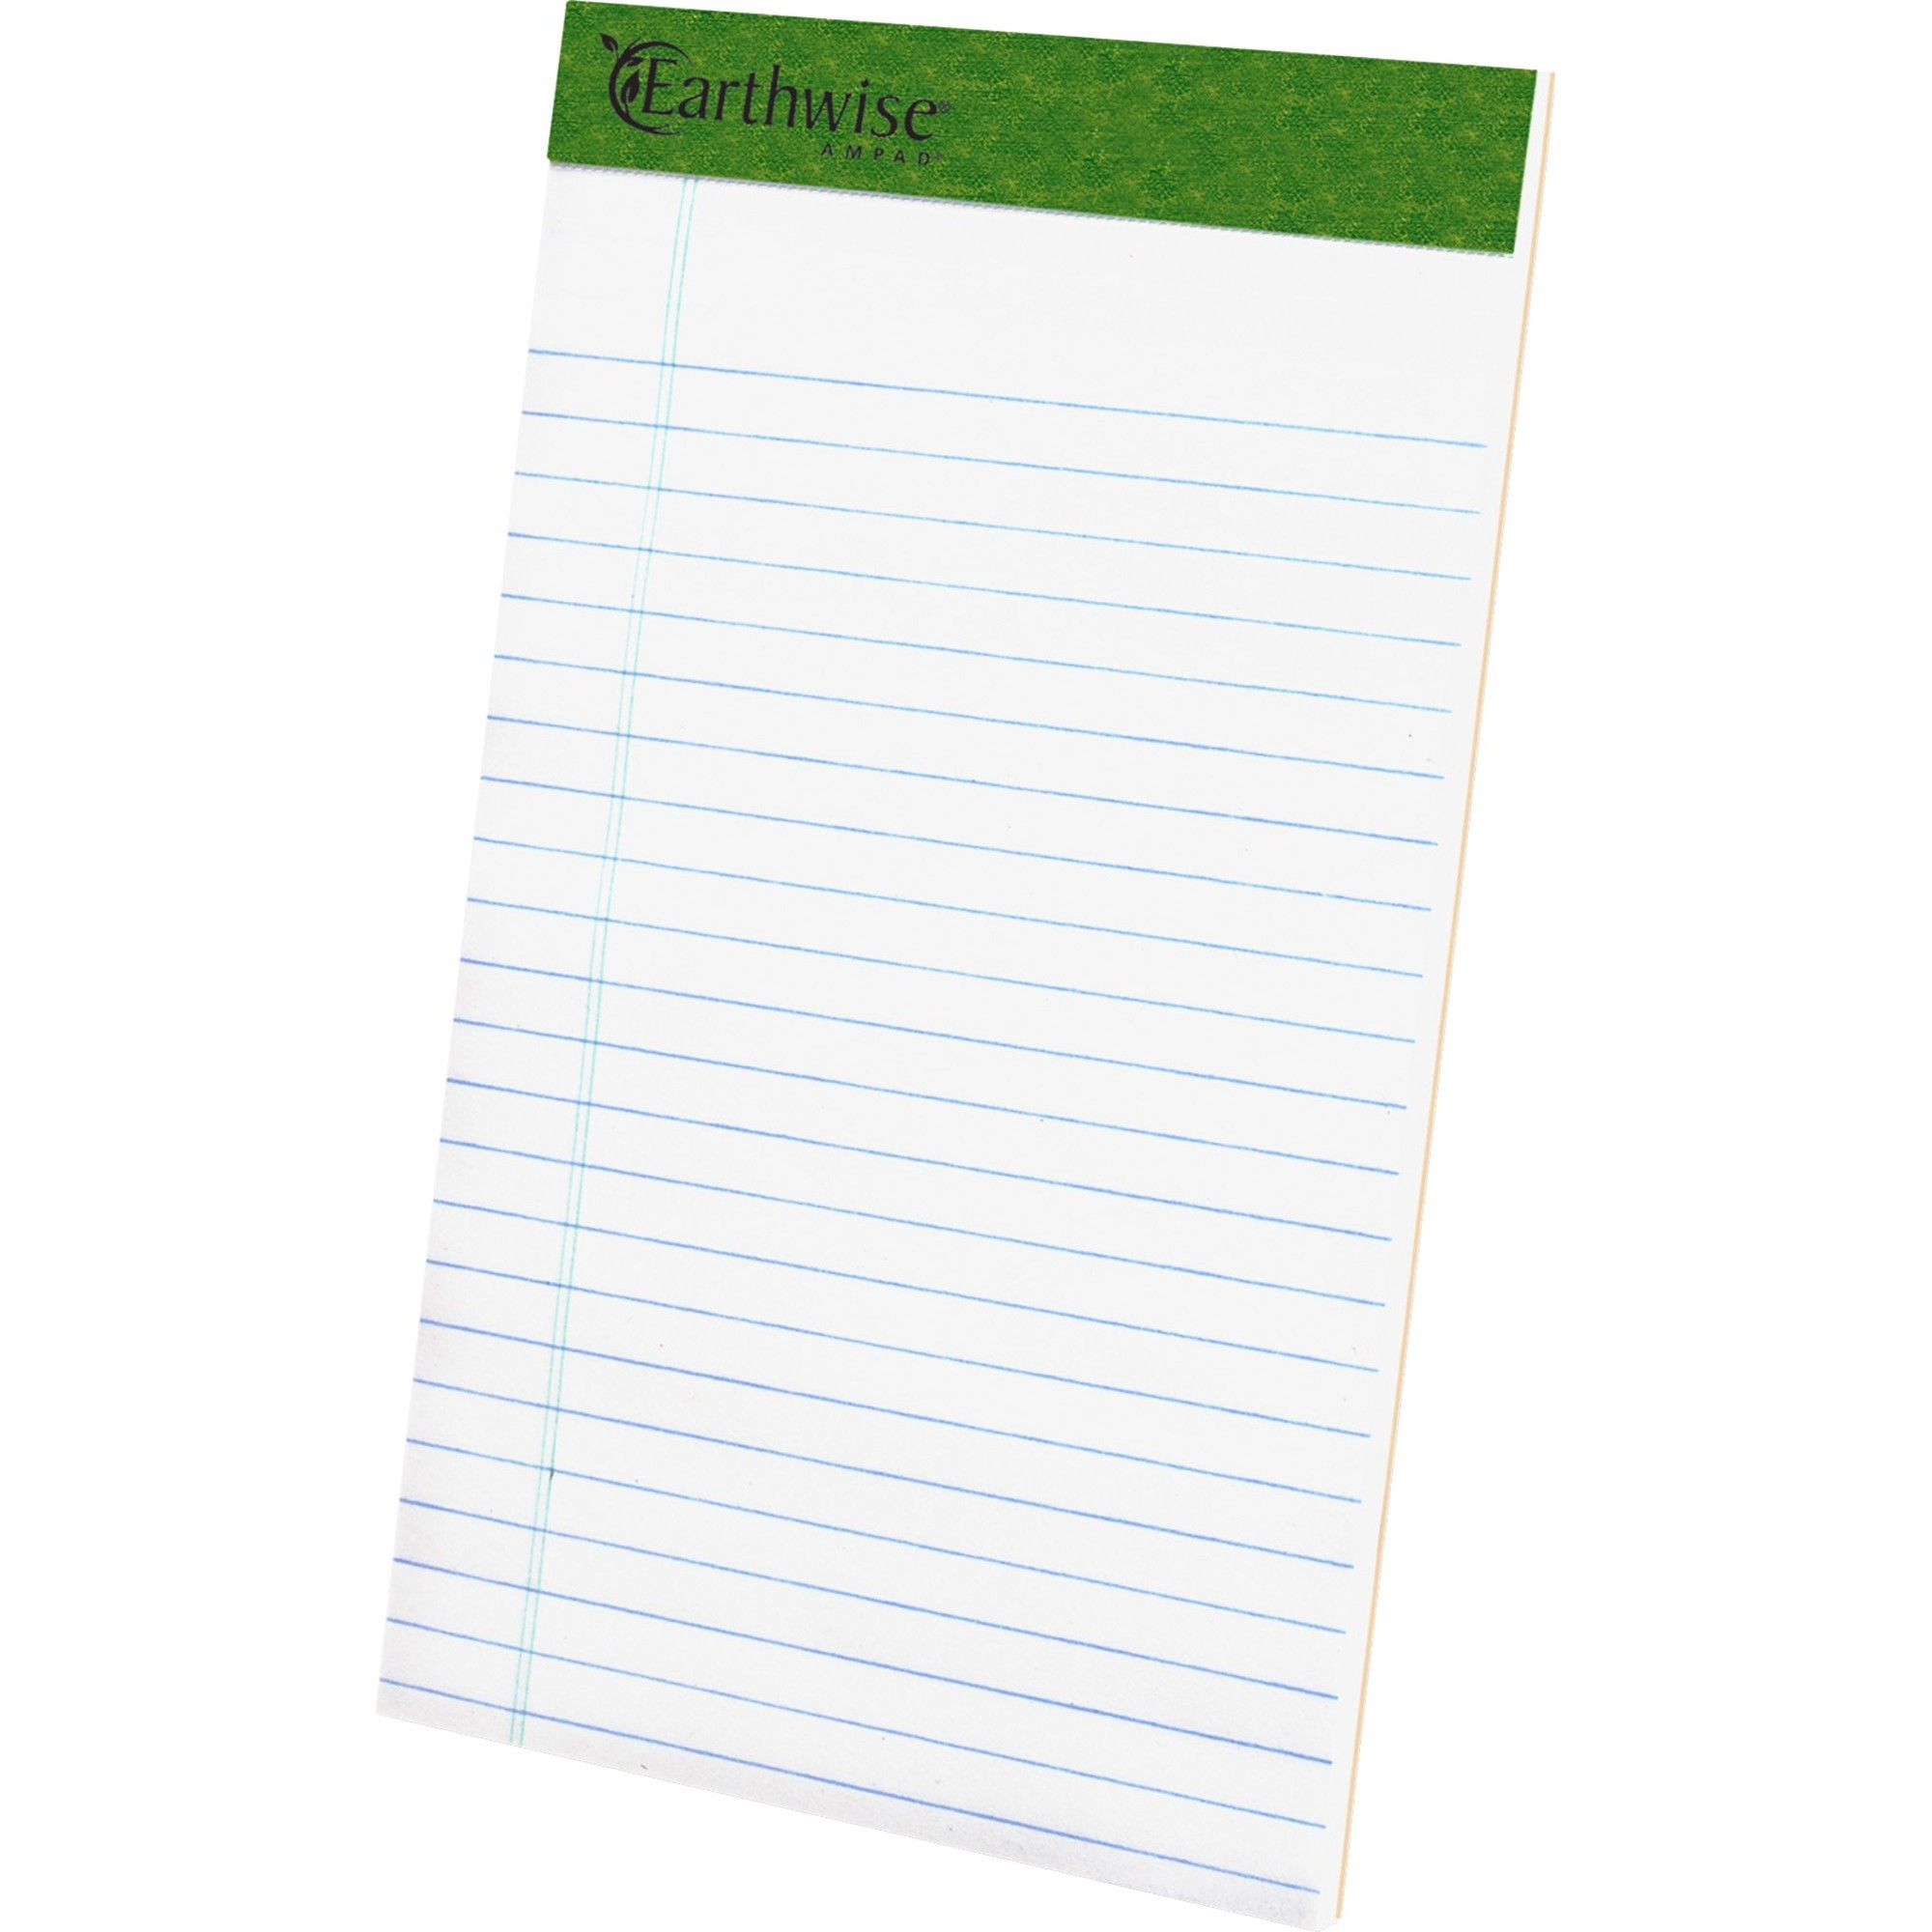 TOPS Recycled Perforated Jr. Legal Rule Pads - 50 Sheets - 0.28" Ruled - 15 lb Basis Weight - 5" x 8" - Environmentally Friendly